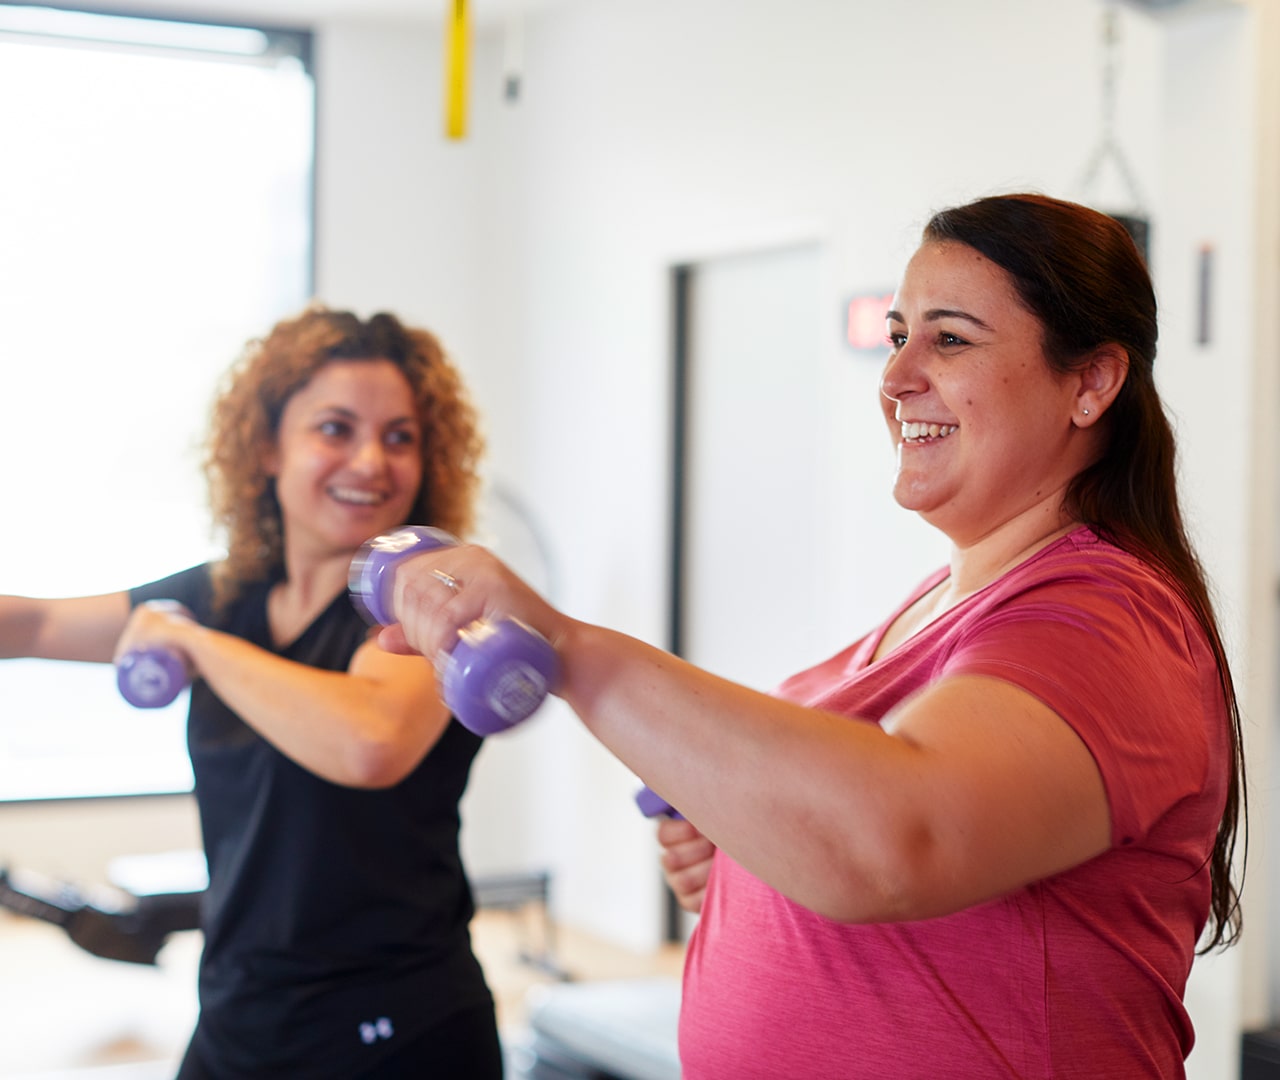 Two ladies smiling and doing an exercise with hand weights